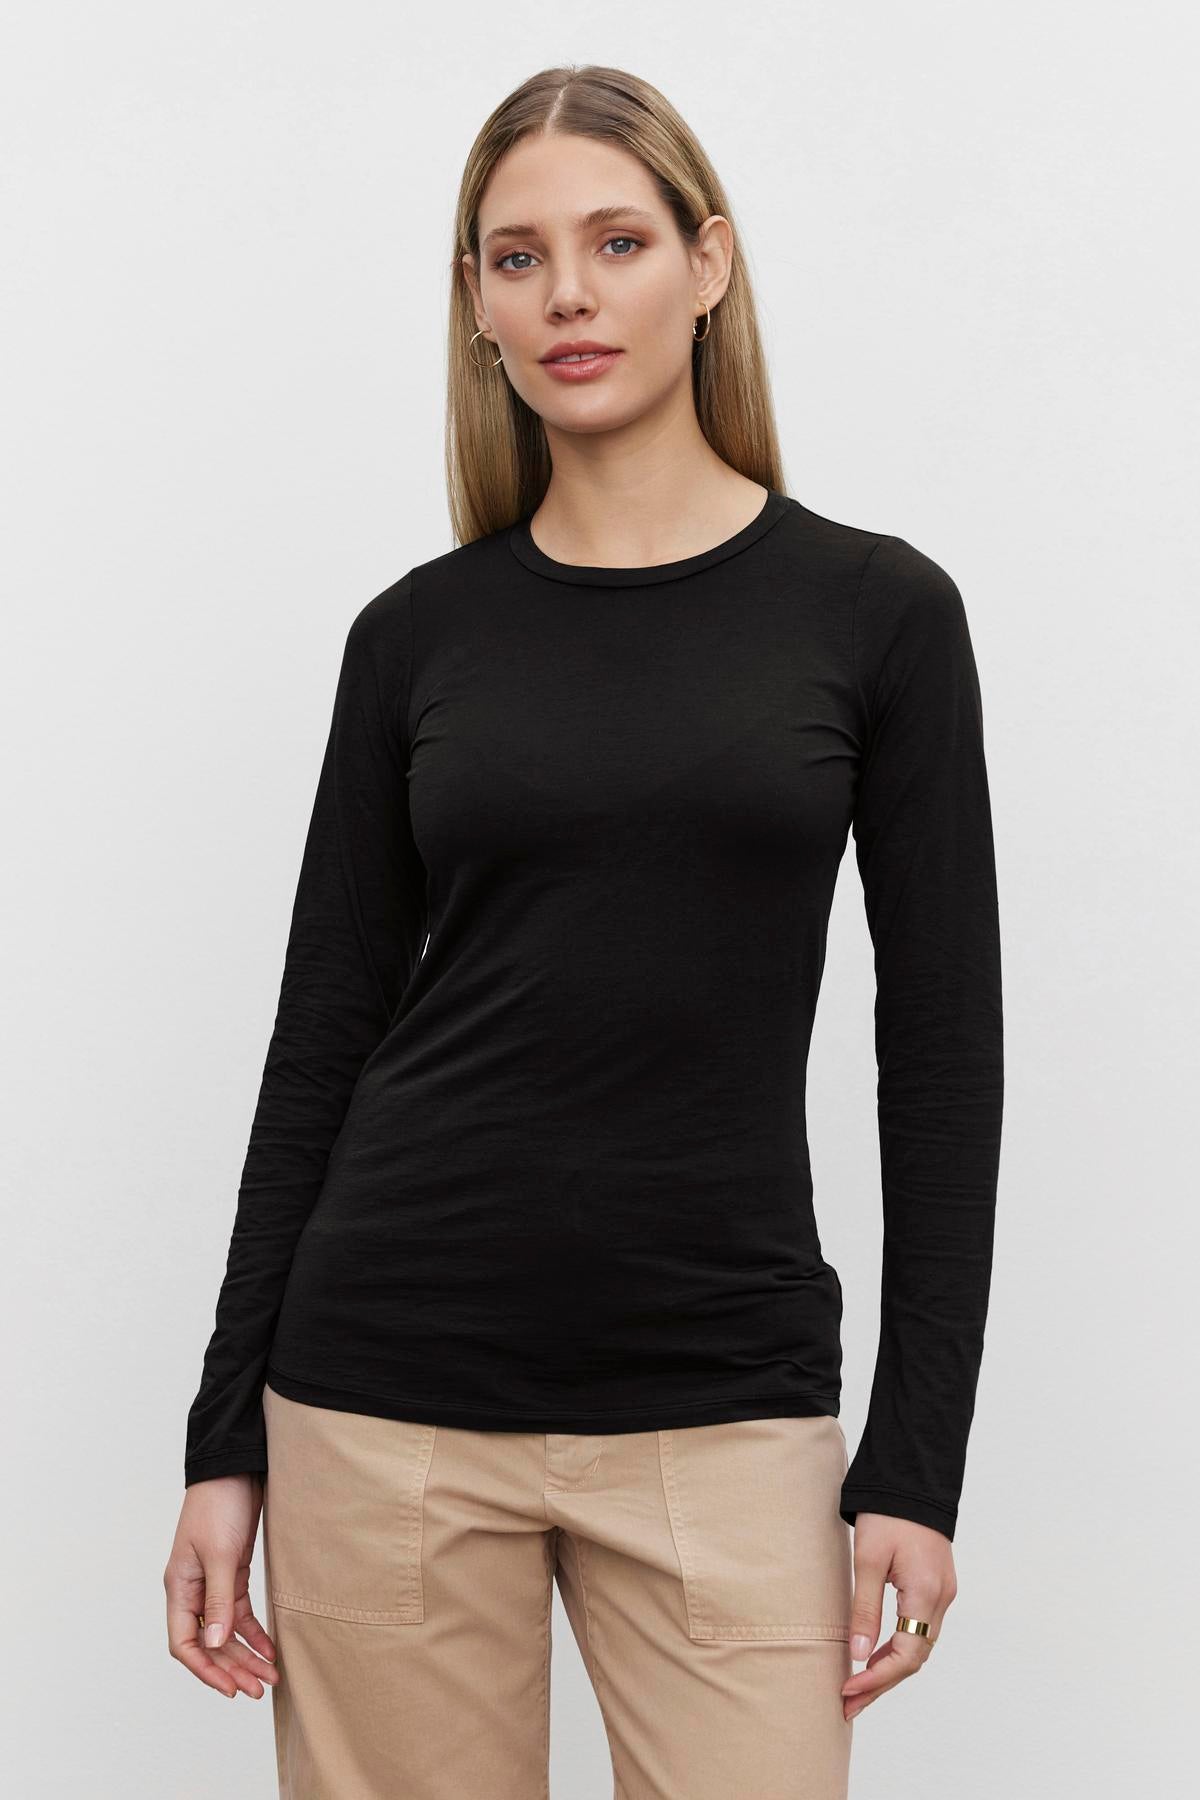 A person with long, straight hair wears the ZOFINA TEE by Velvet by Graham & Spencer, an ultra-soft gauzy whisper fitted black long-sleeve tee with a classic crew neckline, paired with beige pants and stands against a plain white background.-37648649912513